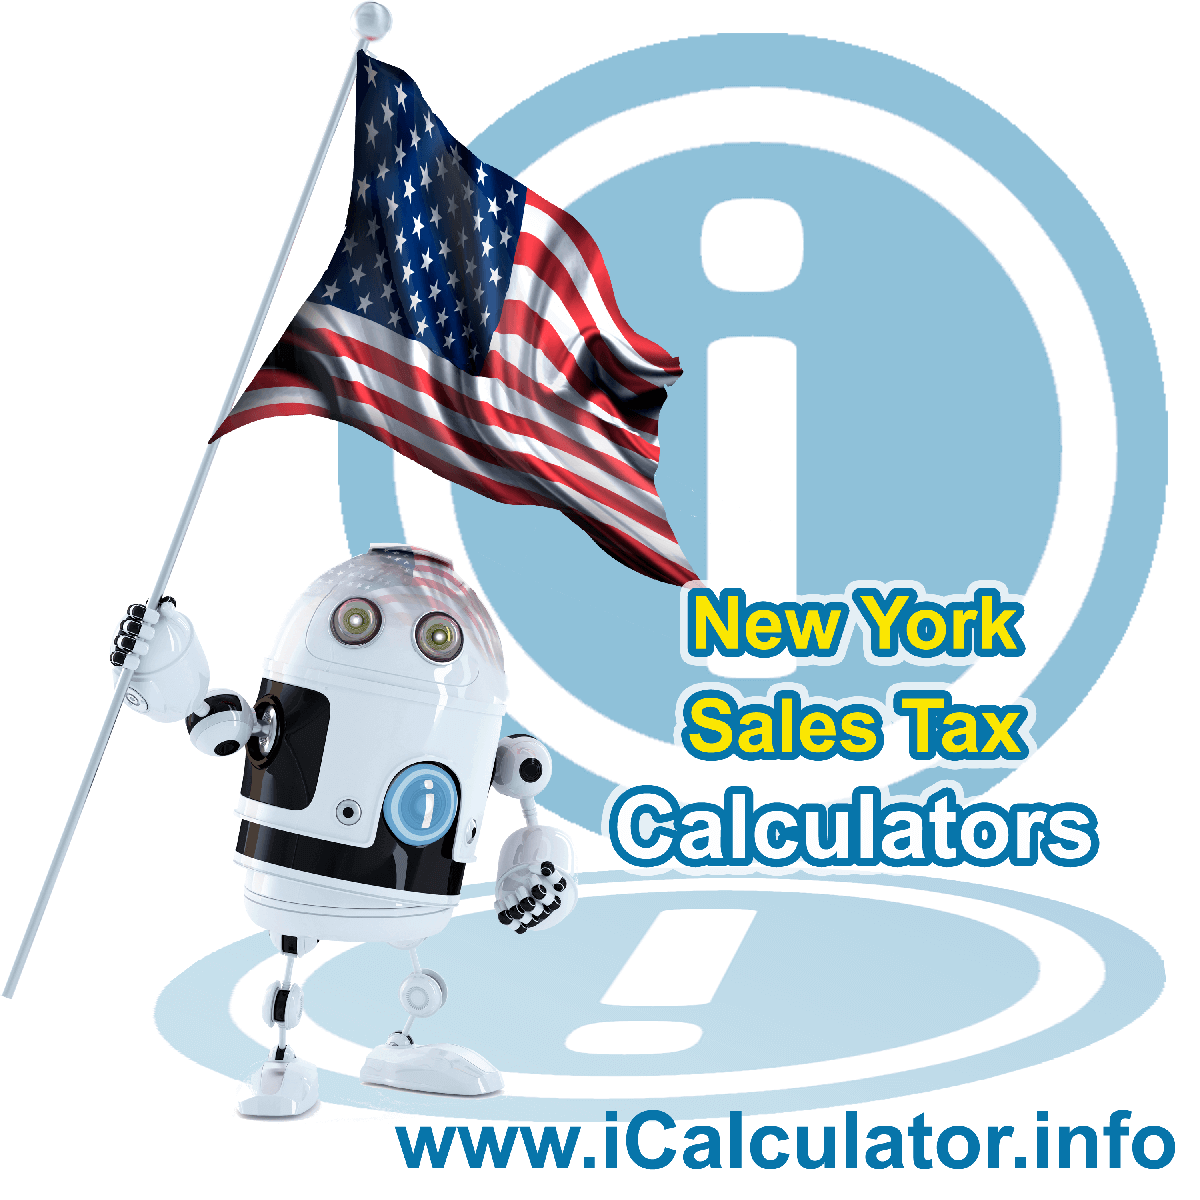 Ulster County Sales Rates: This image illustrates a calculator robot calculating Ulster County sales tax manually using the Ulster County Sales Tax Formula. You can use this information to calculate Ulster County Sales Tax manually or use the Ulster County Sales Tax Calculator to calculate sales tax online.